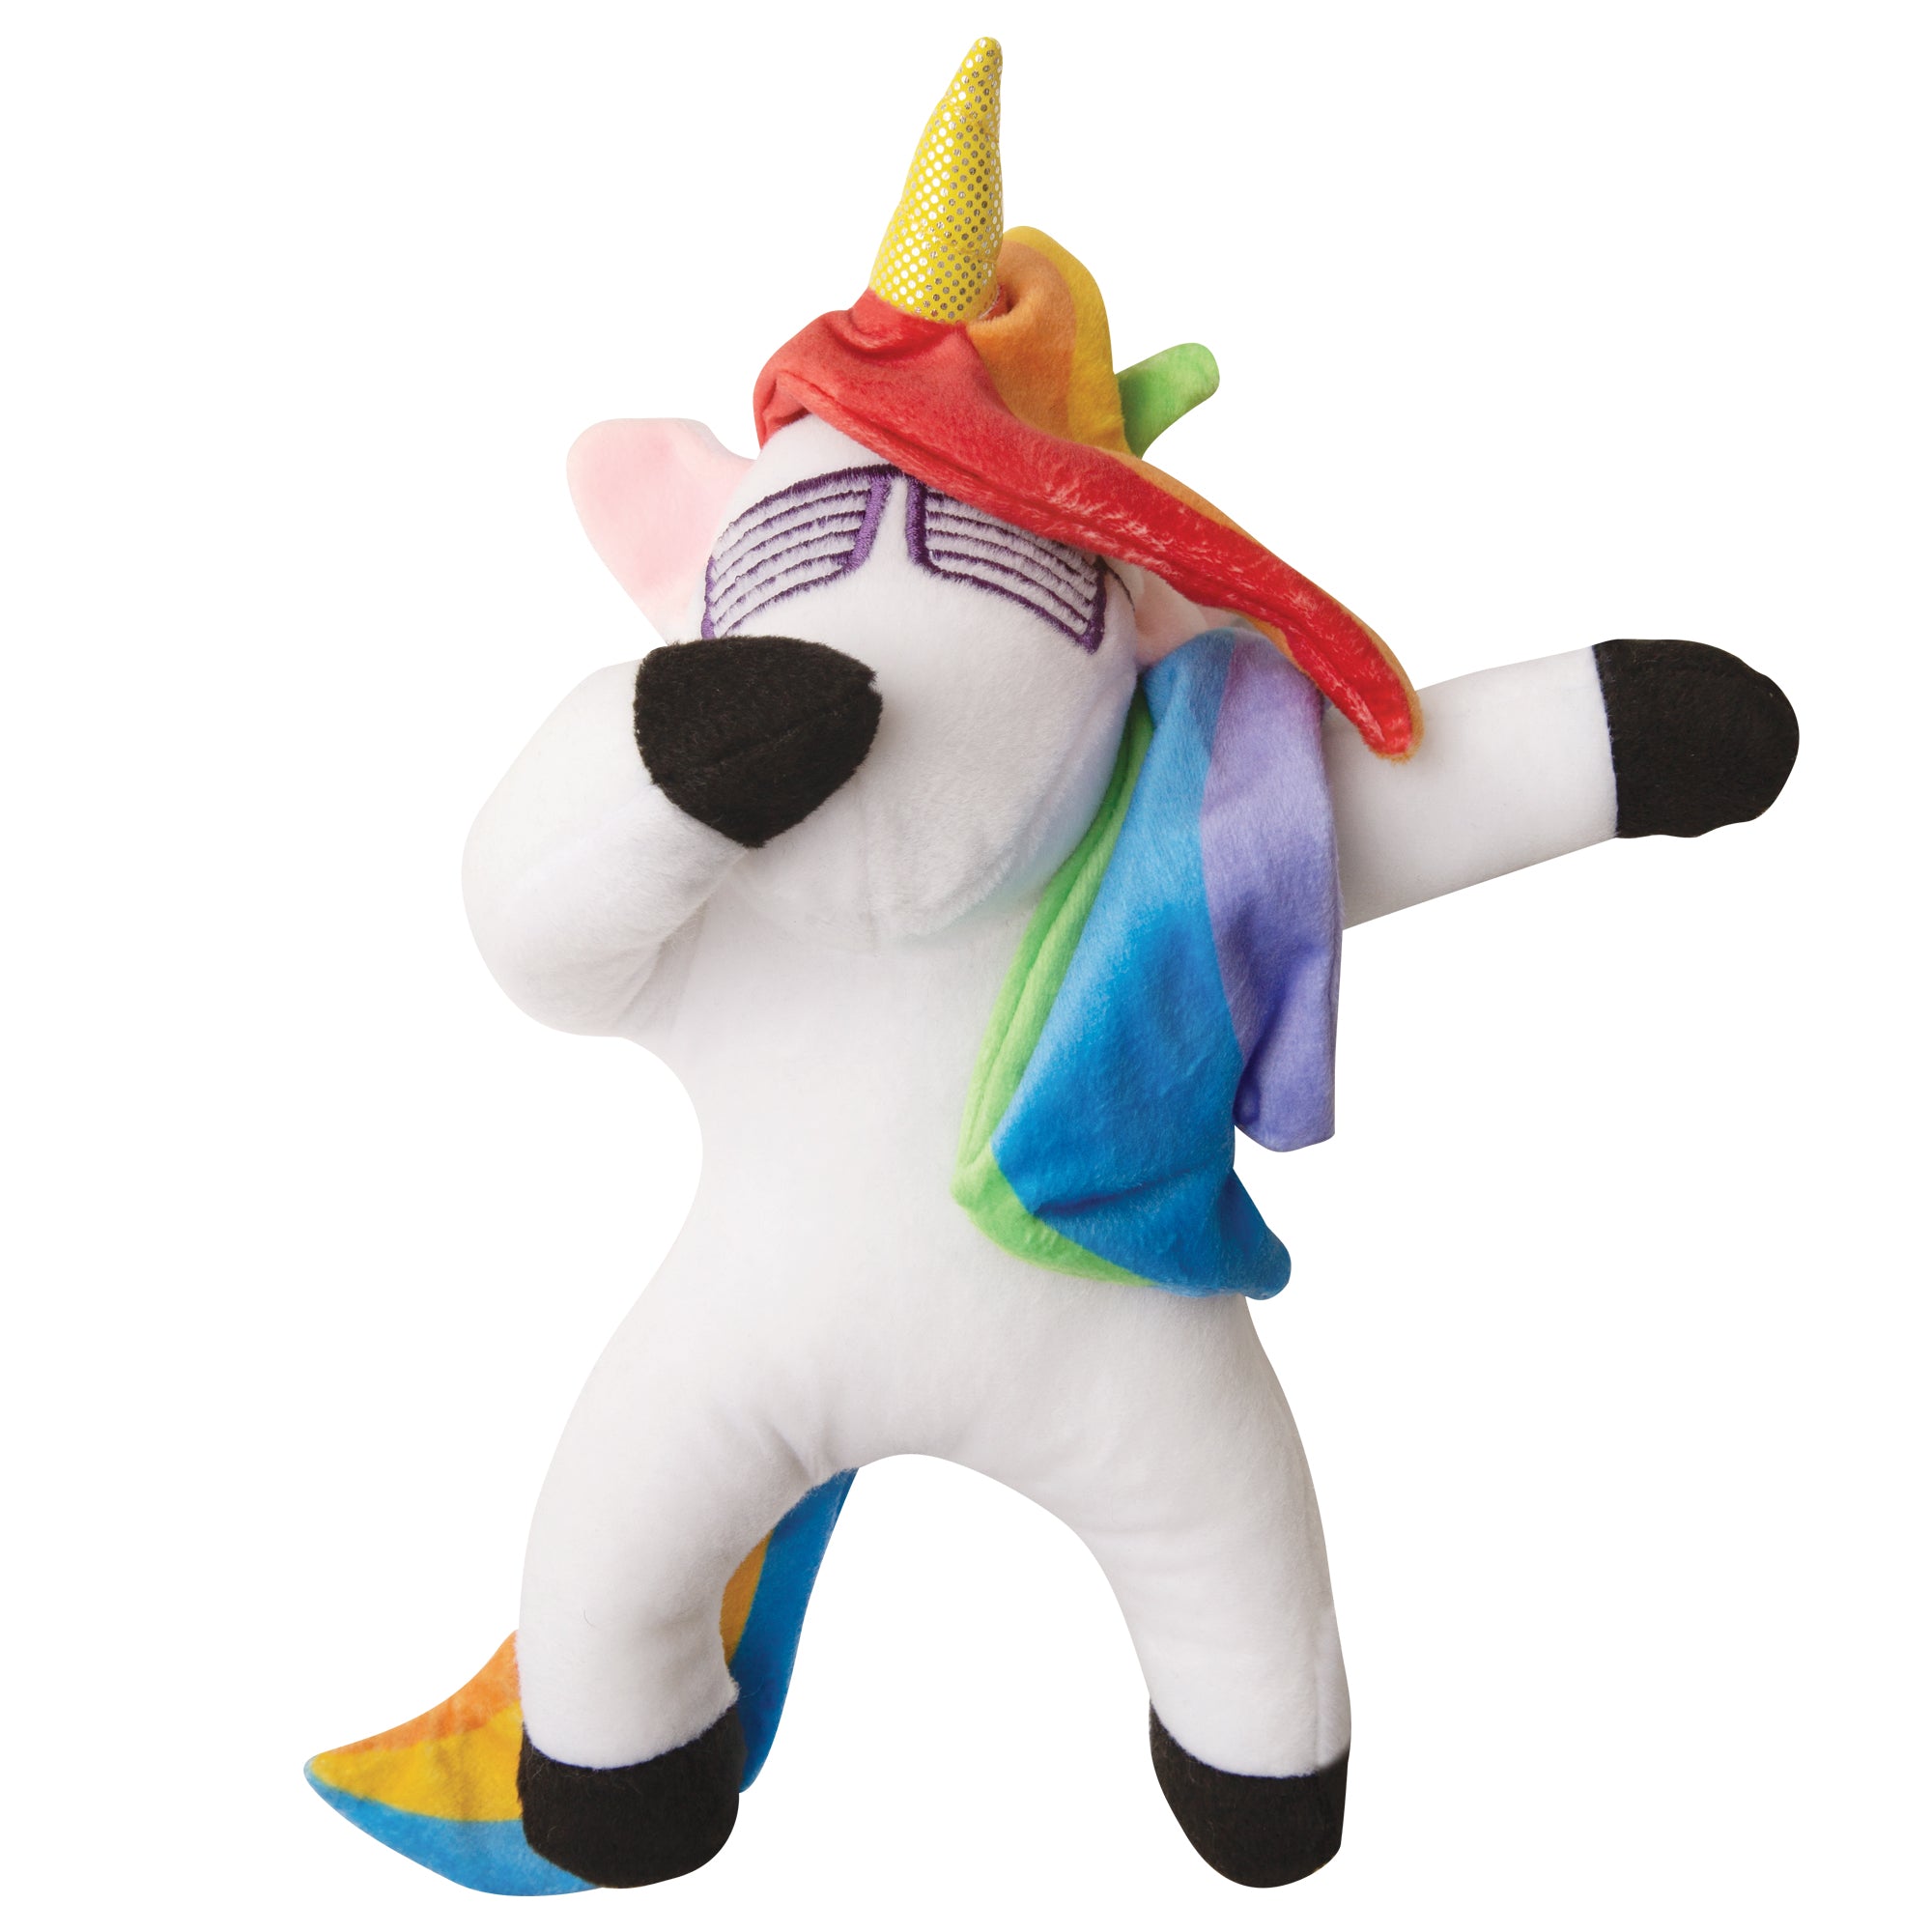 SnugArooz dog toy named Dab the Unicorn, featuring a white plush unicorn with a multicolored tail and mane, a golden horn, and wearing sunglasses.